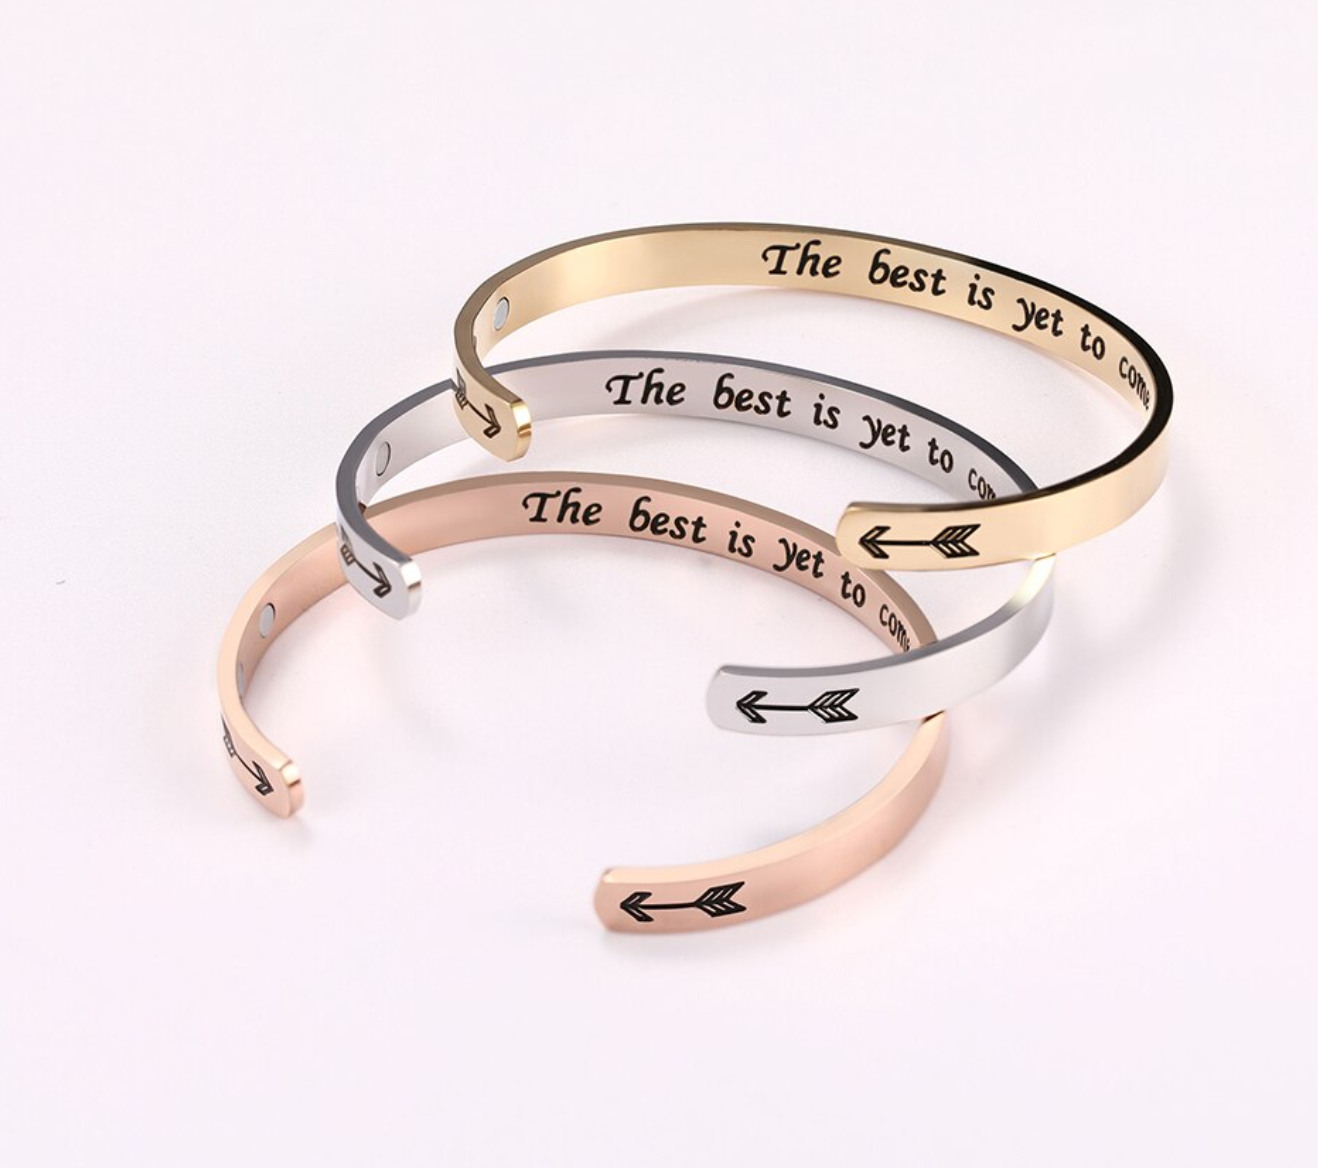 Engraved Stainless Steel Adjustable Cuff Bracelet - The Best Is Yet To Come -  3 Colours